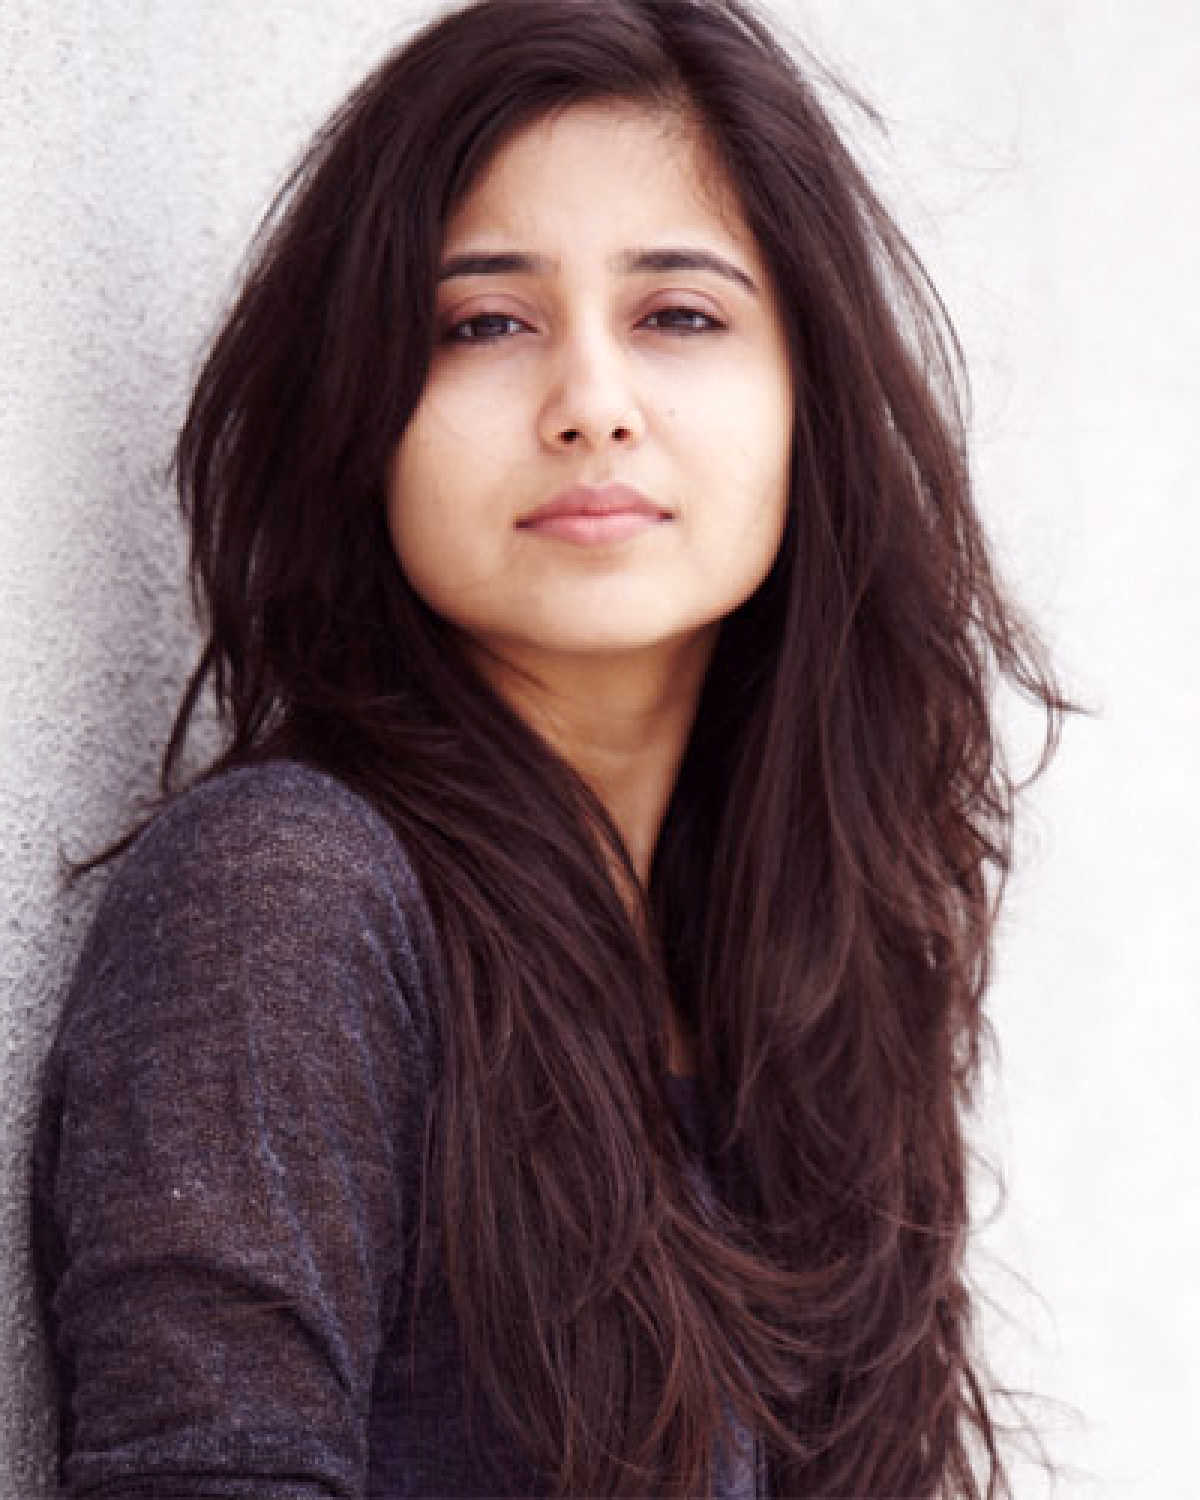 The thrill for the actors comes from the process, not through medium: Shweta Tripathi